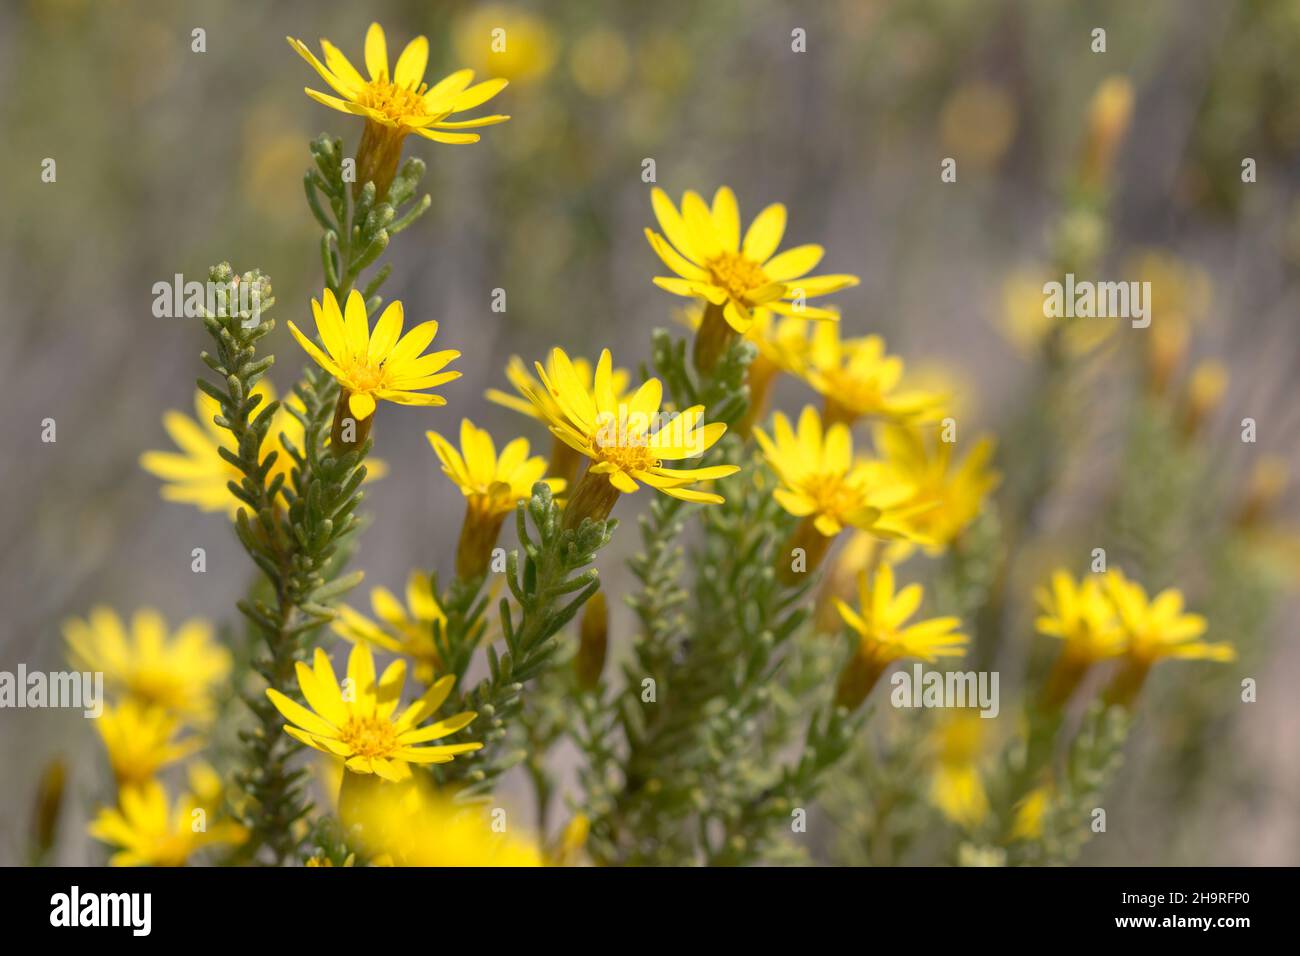 Yellow daisy flower bush closeup of the plant with blooming flowers Stock Photo